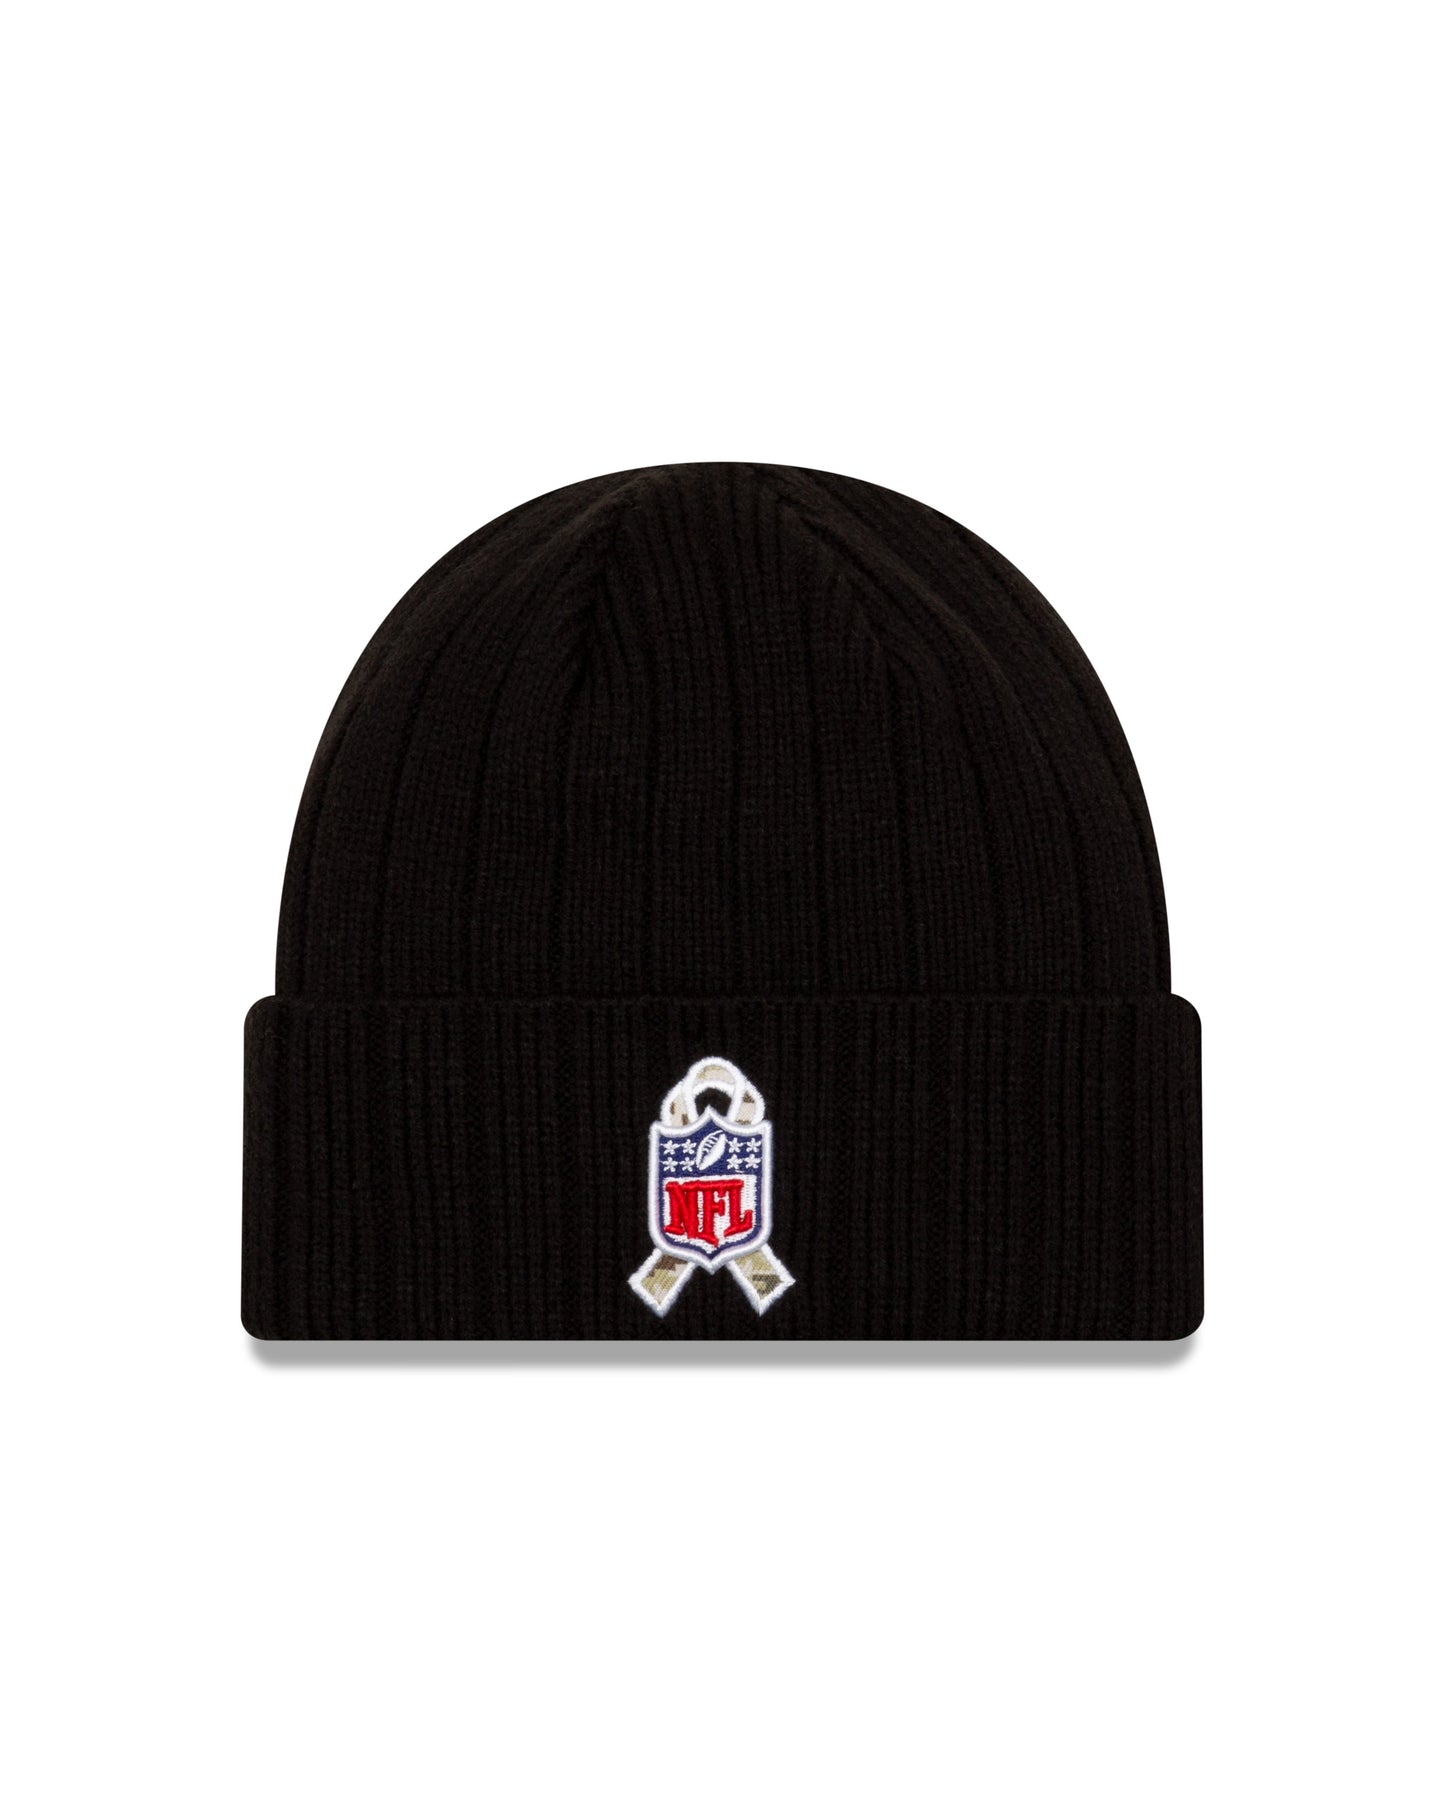 Tennessee Titans New Era Salute to Service Sideline Knit Hat- Black